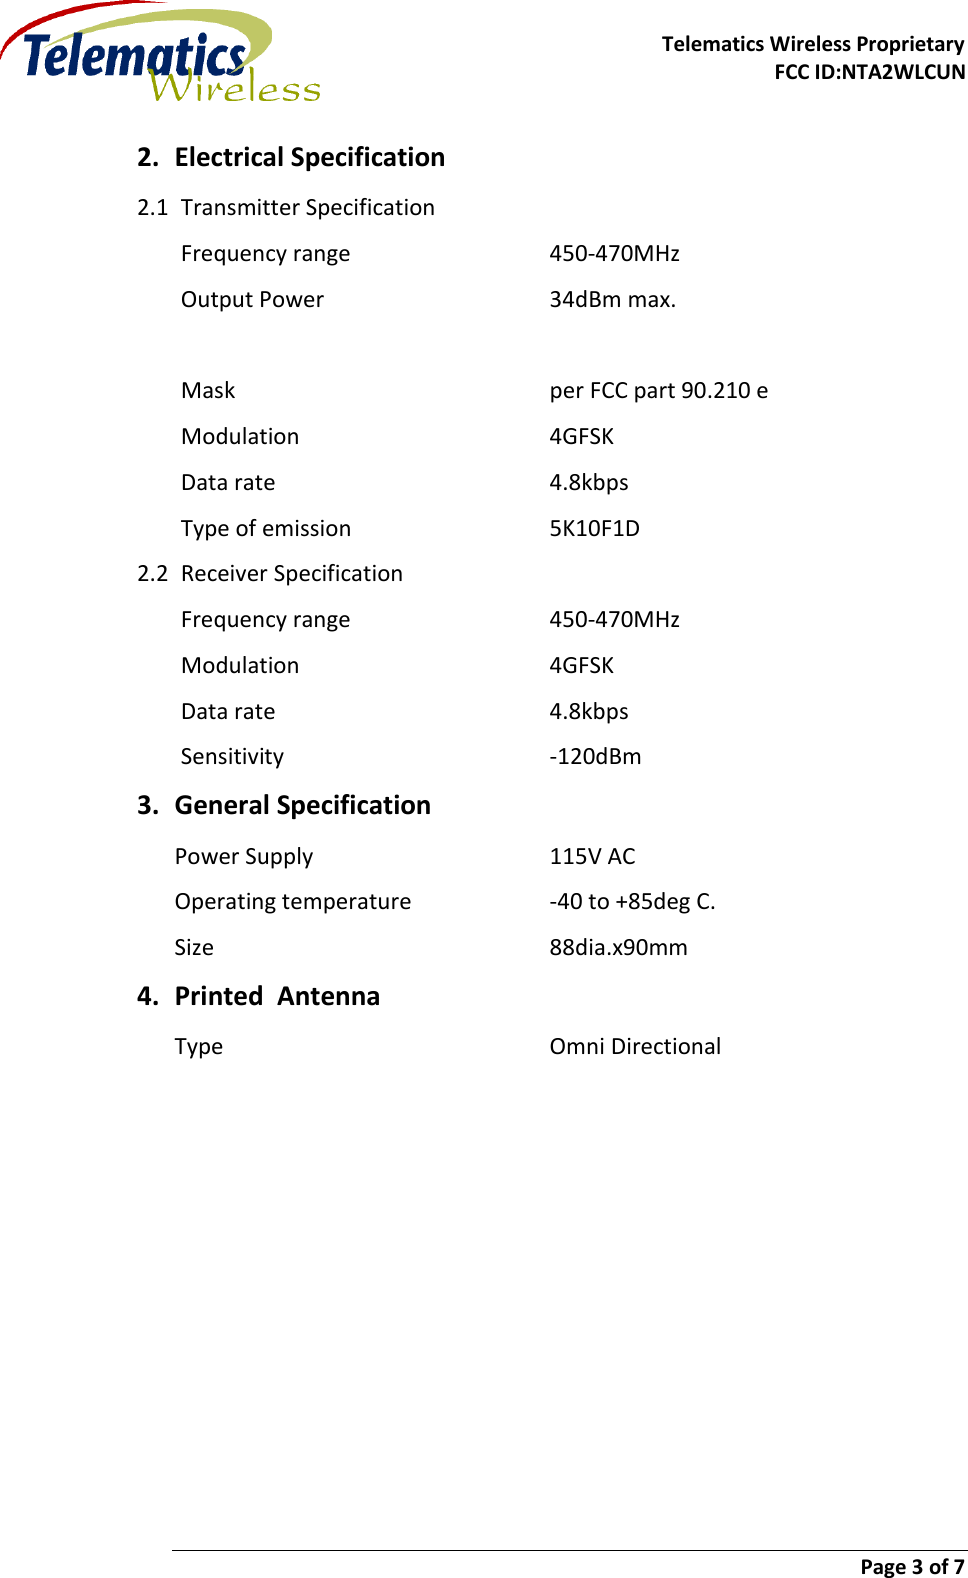     Telematics Wireless Proprietary FCC ID:NTA2WLCUN                        Page 3 of 7   2. Electrical Specification 2.1 Transmitter Specification Frequency range      450-470MHz Output Power       34dBm max.           Mask          per FCC part 90.210 e Modulation        4GFSK Data rate        4.8kbps Type of emission      5K10F1D 2.2 Receiver Specification Frequency range      450-470MHz Modulation        4GFSK Data rate        4.8kbps Sensitivity        -120dBm 3. General Specification Power Supply        115V AC Operating temperature    -40 to +85deg C. Size          88dia.x90mm     4. Printed  Antenna Type          Omni Directional    